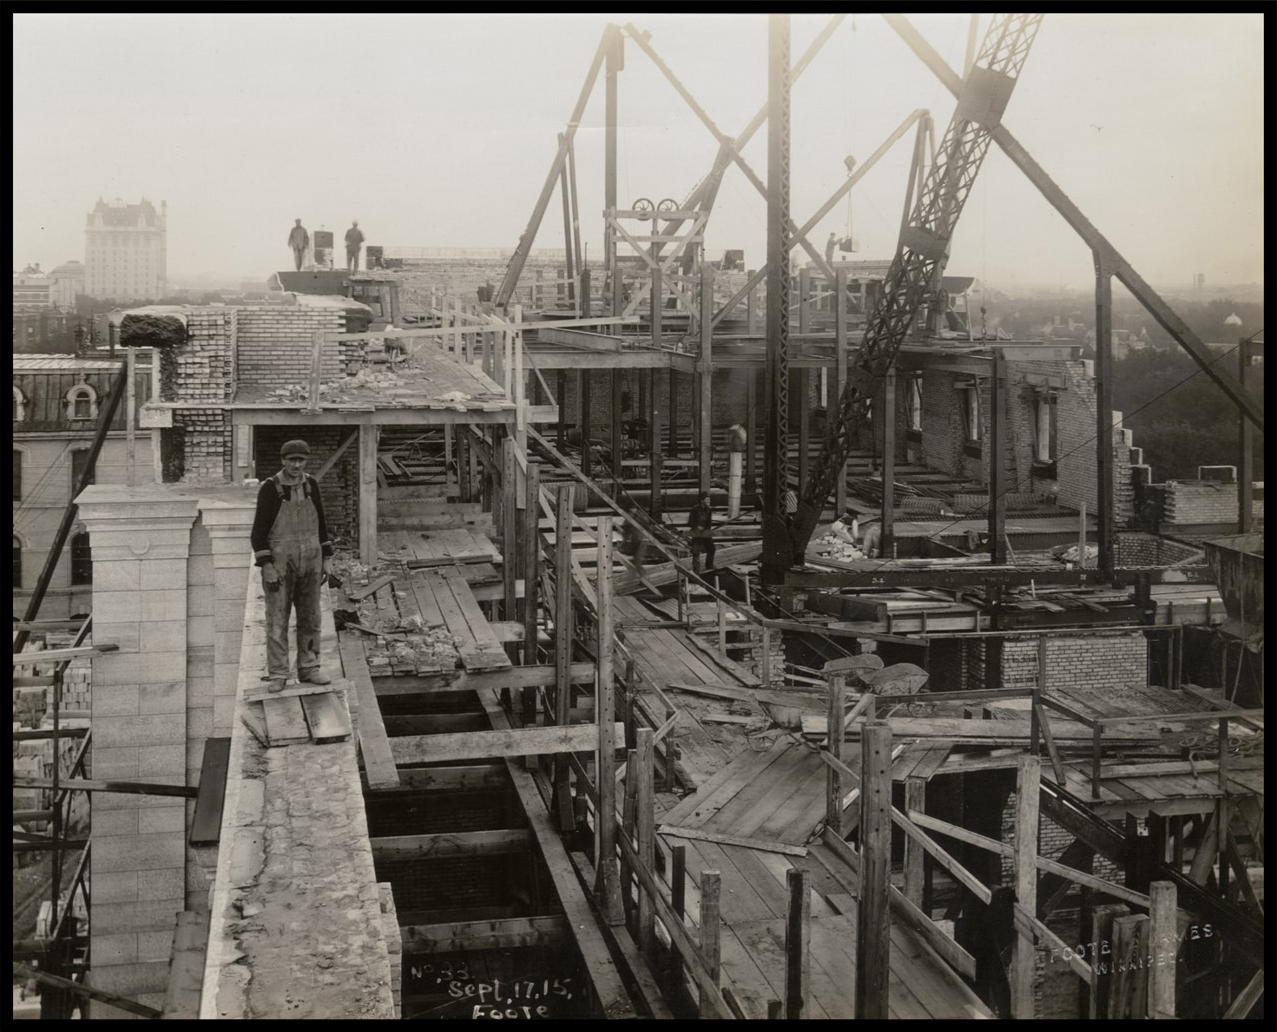 Photo of the top of the building under construction. The floors are temporary wood planks with protruding steel frames. Some of the brick walls are only partially complete. Several men stand throughout the area. One man is prominent in the foreground, standing on a plank. Other men sit on steel beams in the middle of the building. Two men stand on top of the wall in the distance. A man in the distance reaches towards a beam suspended by a crane.